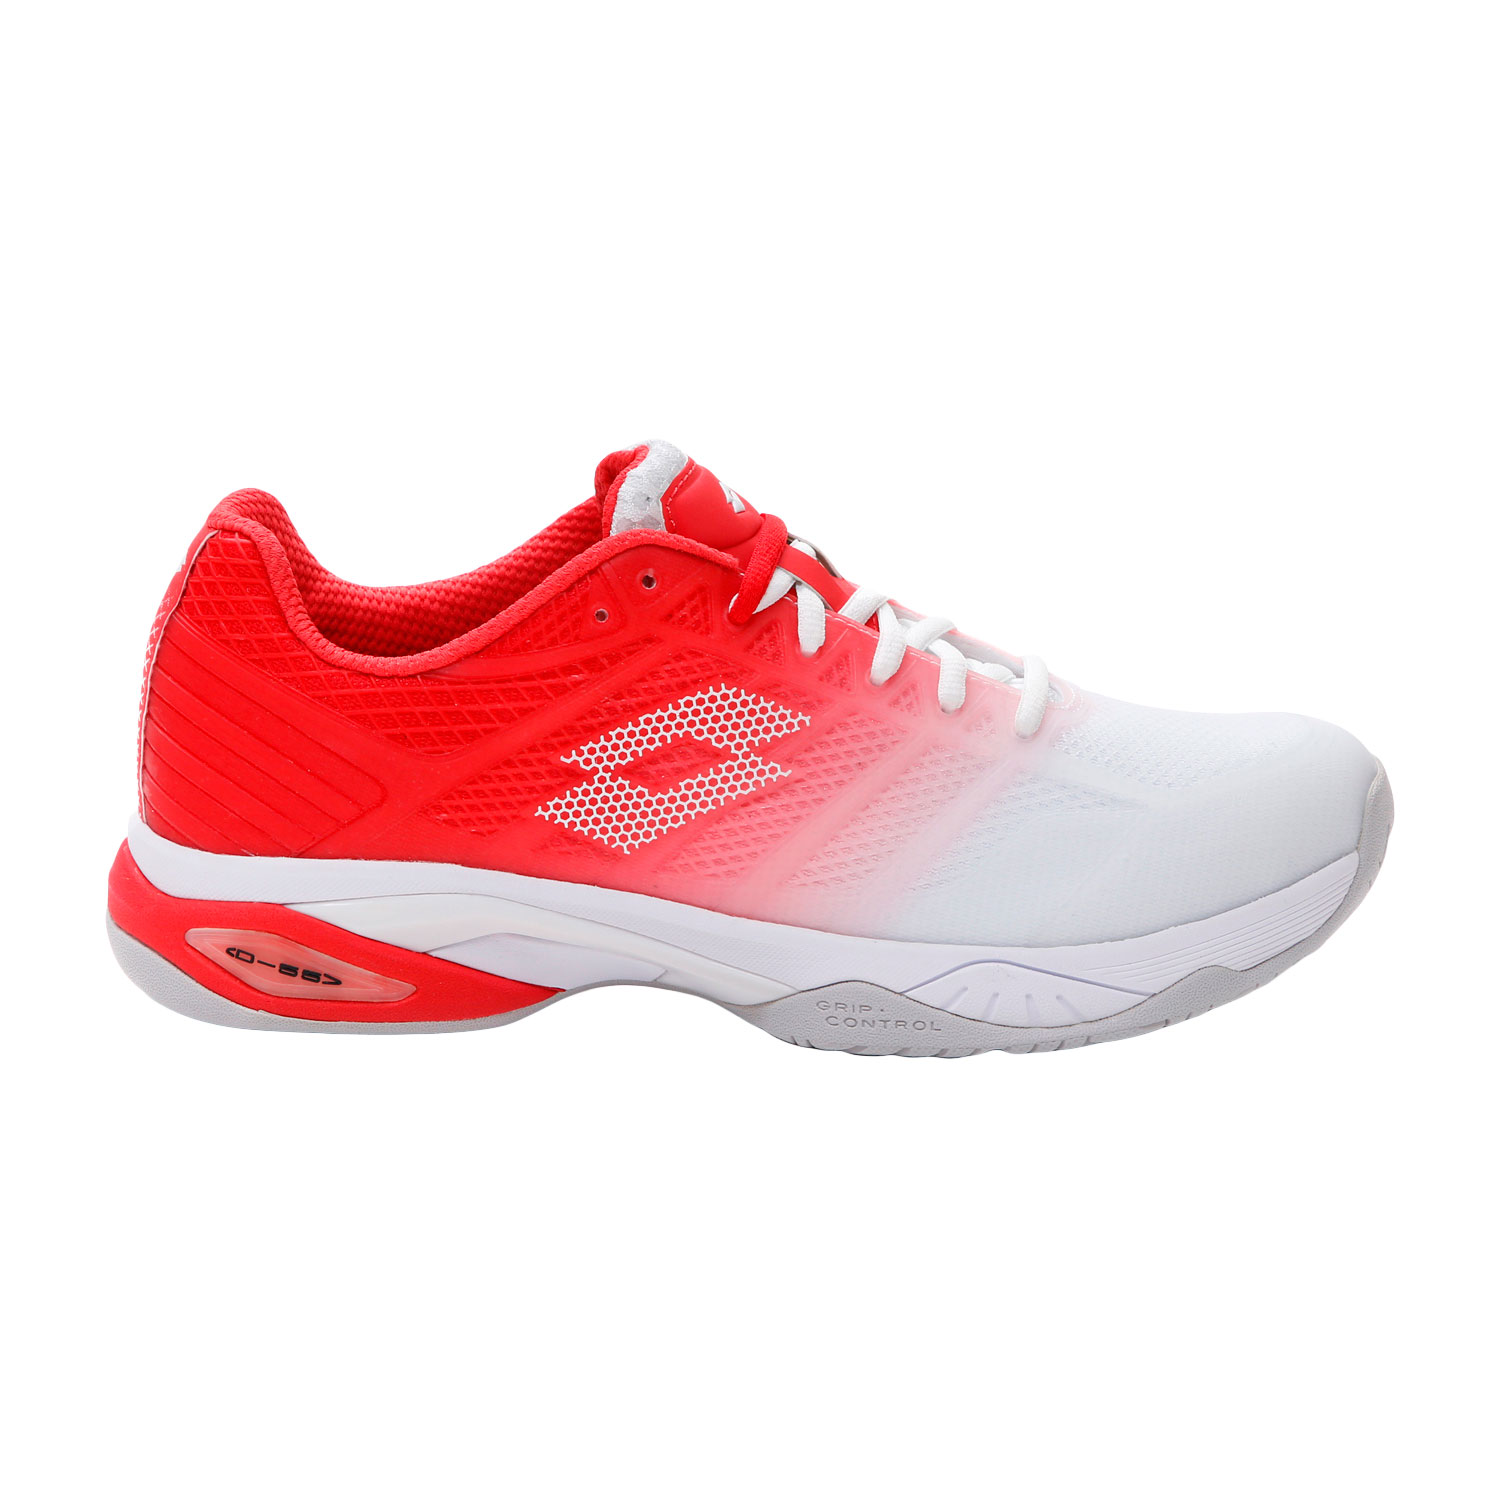 all red mens tennis shoes